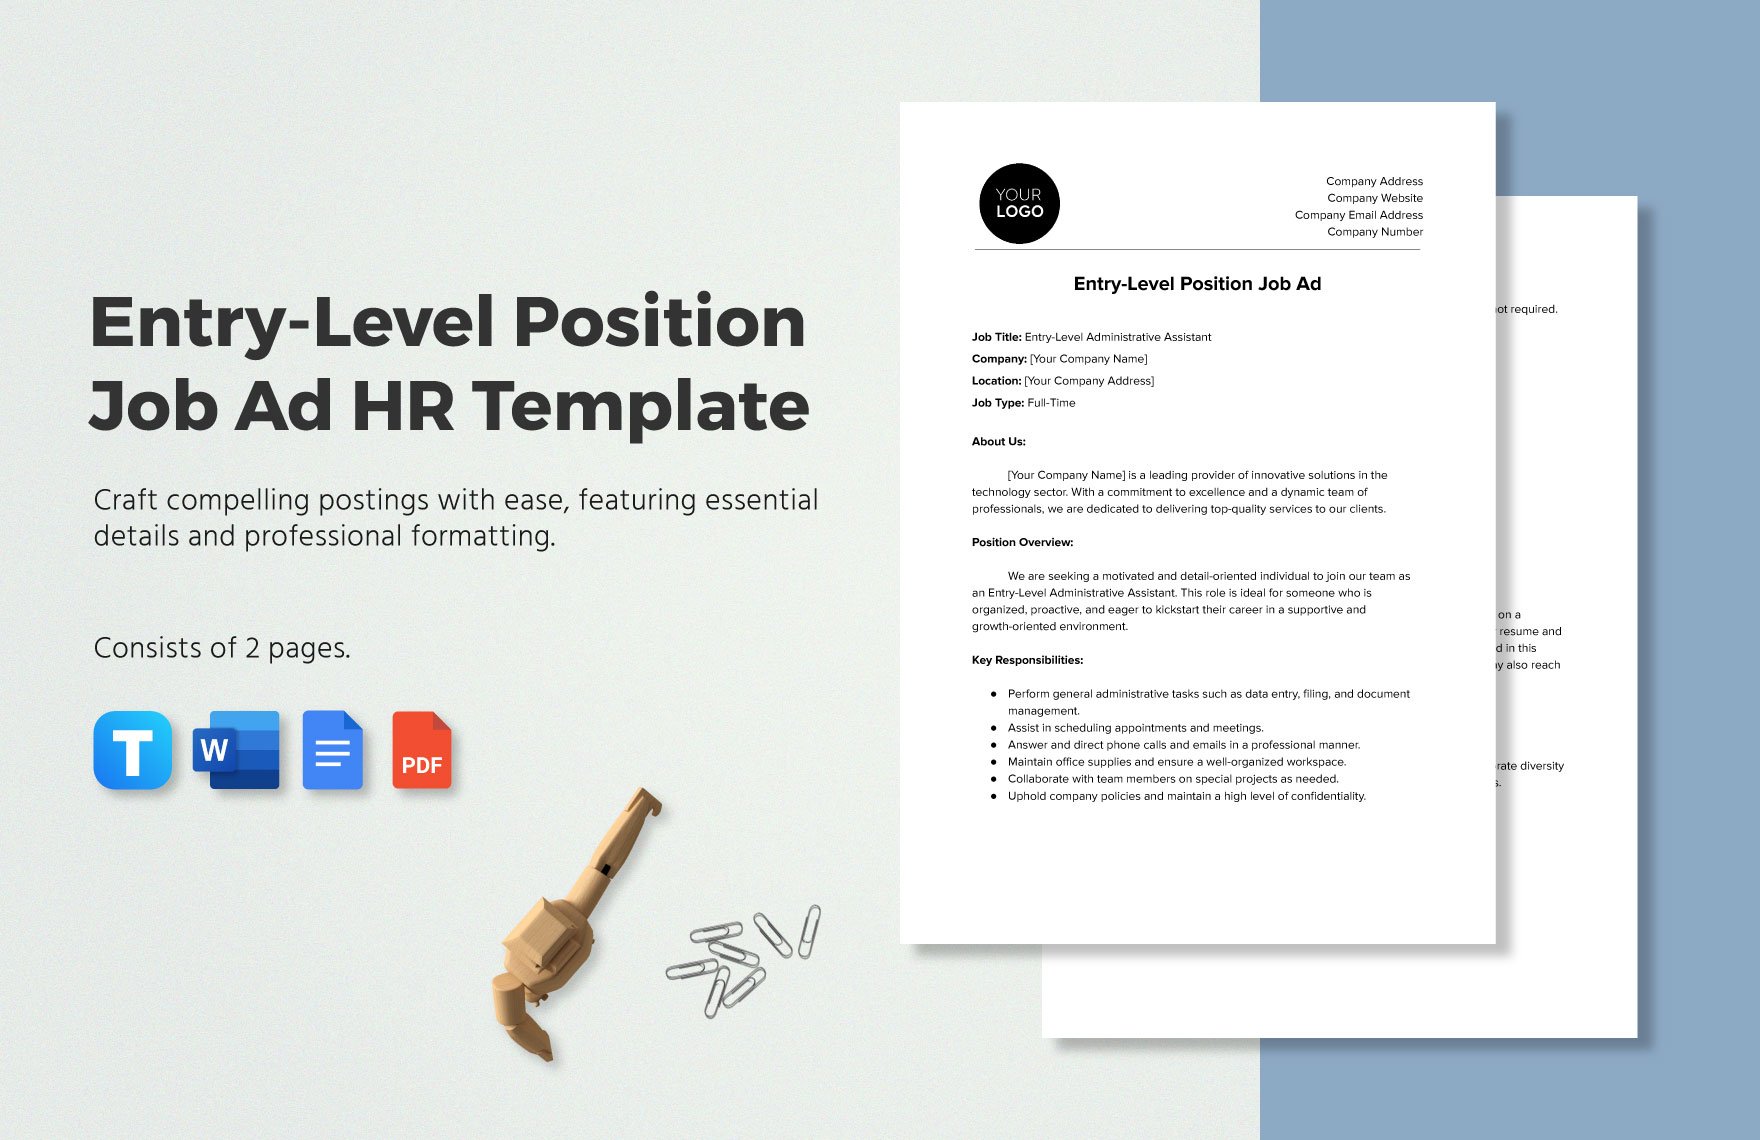 Entry-Level Position Job Ad HR Template